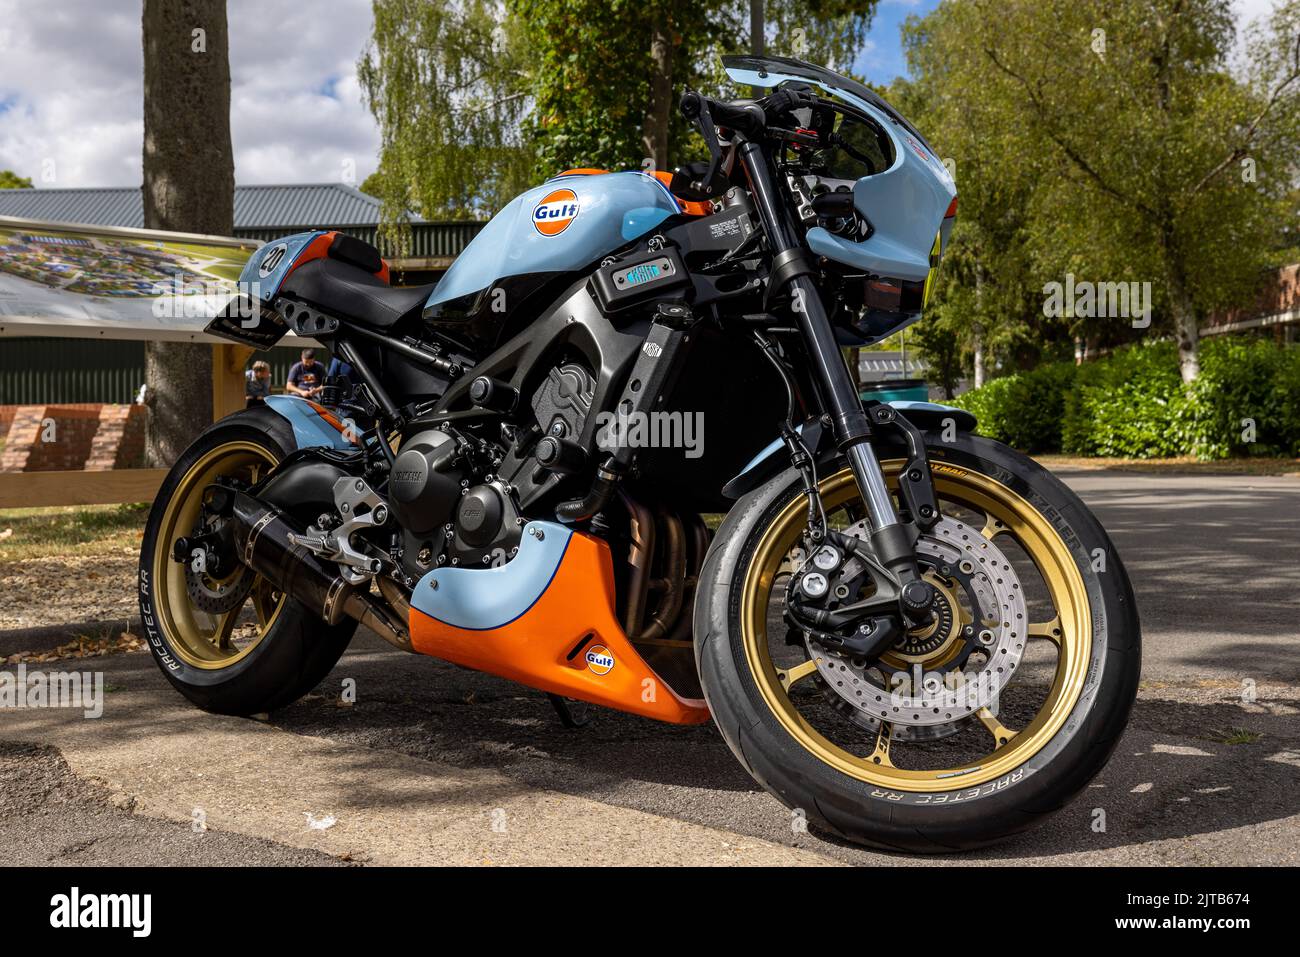 Yamaha XSR900 Abarth ‘AU67 HBX’ with the iconic Gulf livery at the Bicester Heritage Centre Stock Photo